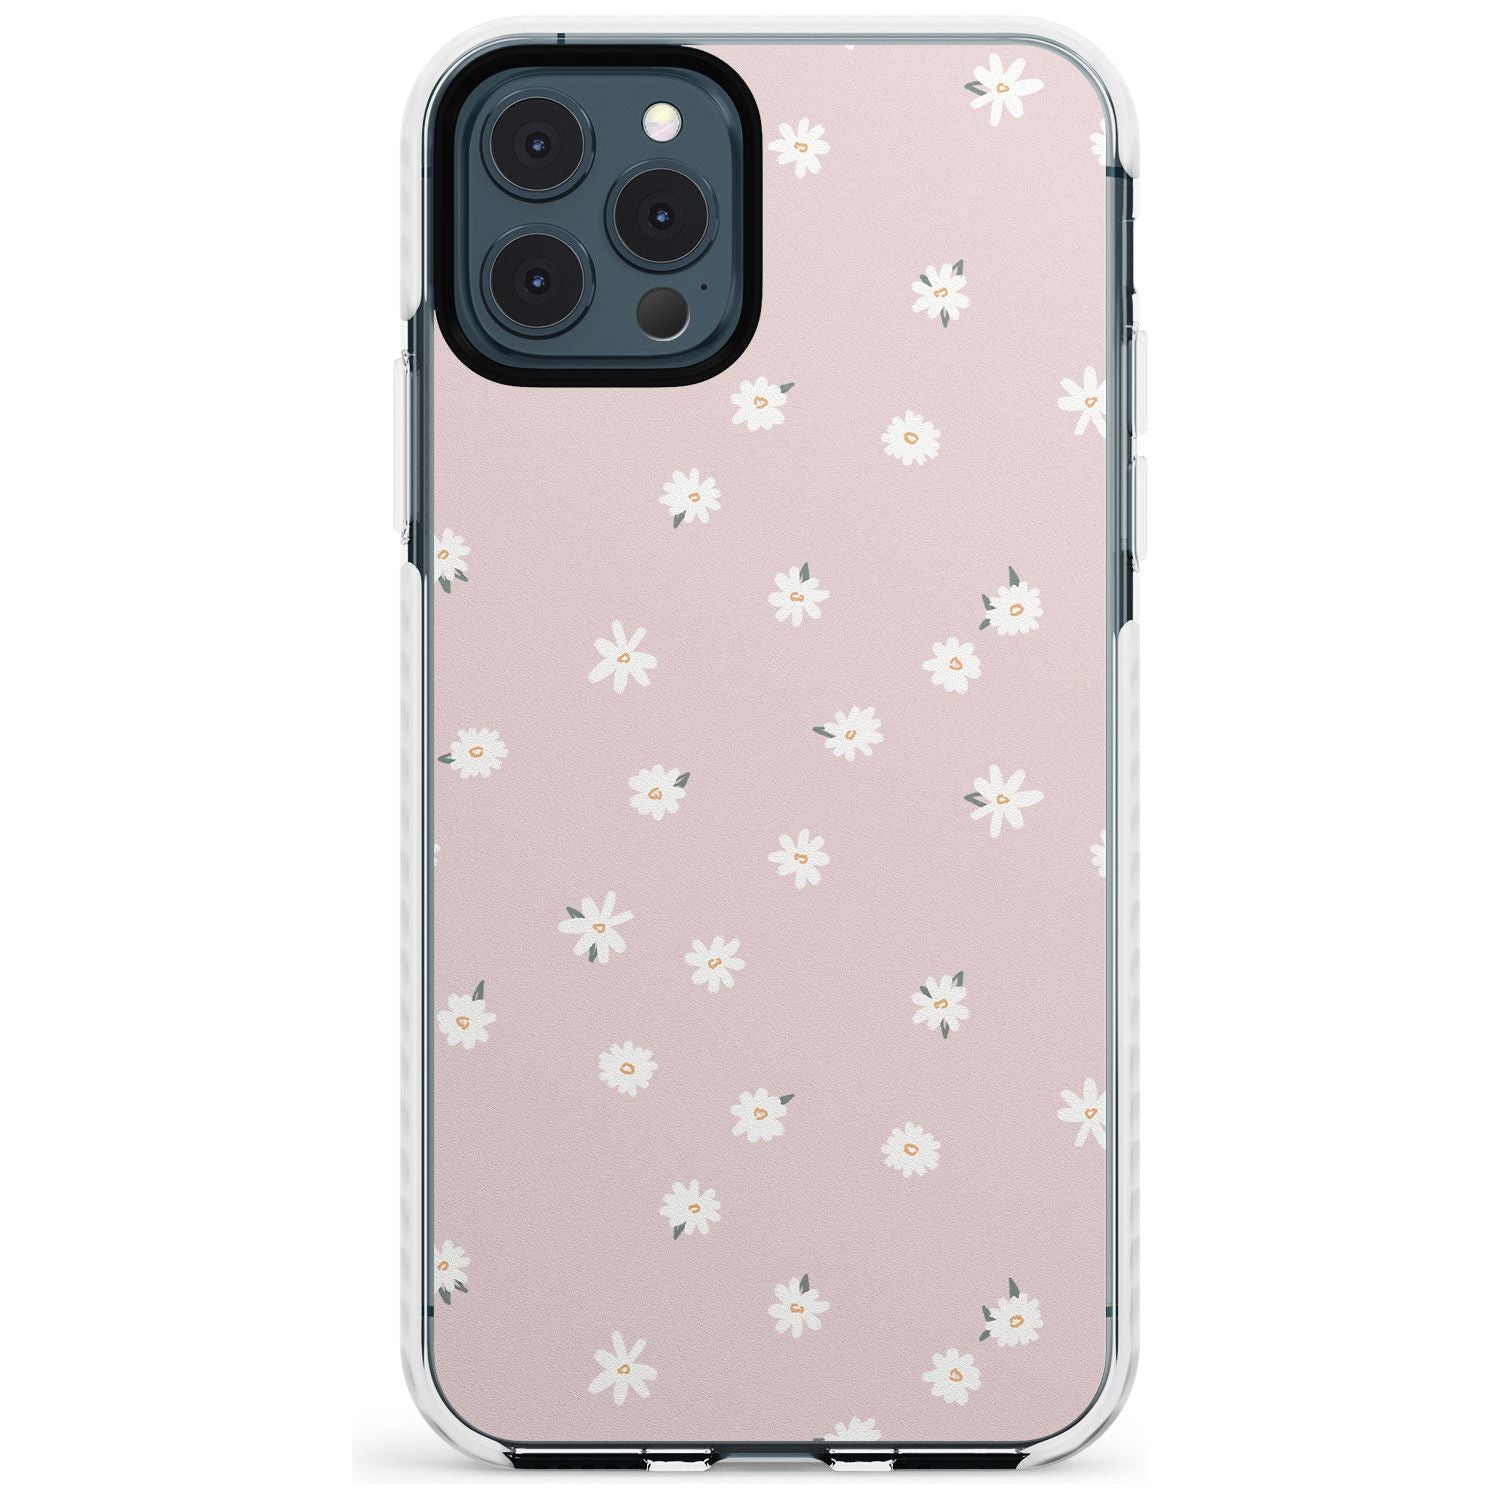 Painted Daises on Pink - Cute Floral Daisy Design Slim TPU Phone Case for iPhone 11 Pro Max